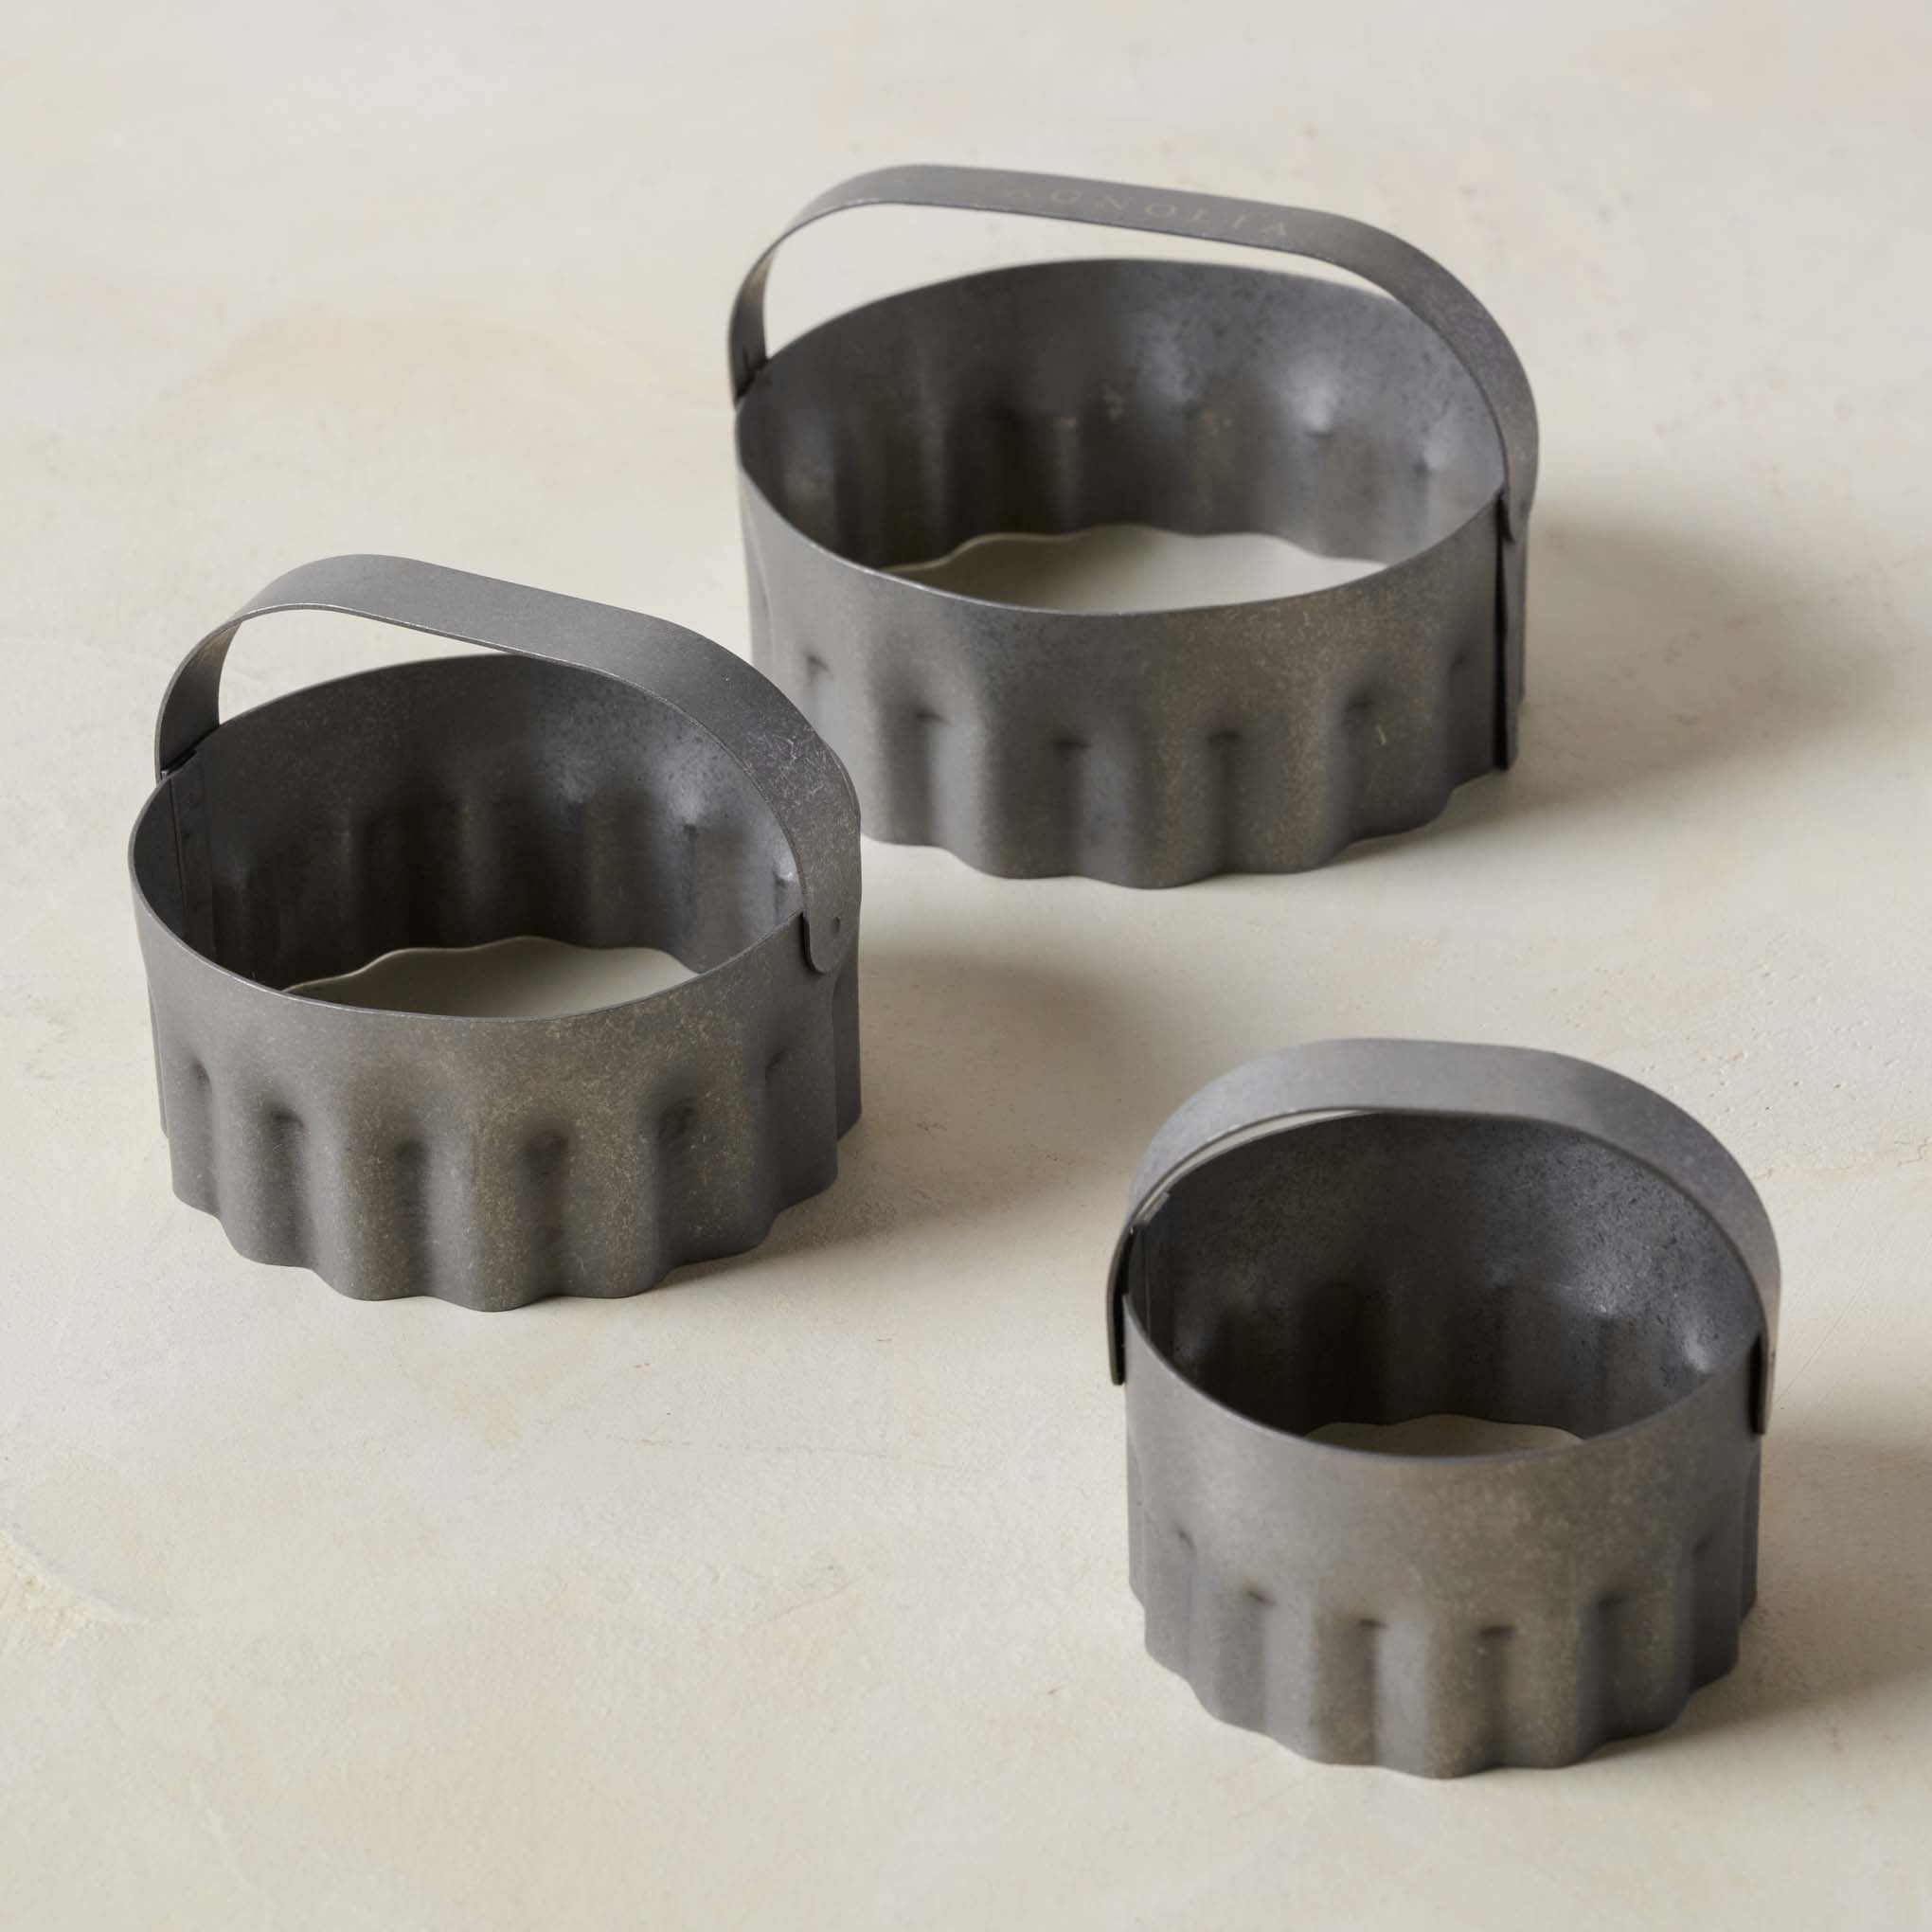 Magnolia Fluted Biscuit Cutters in various sizes